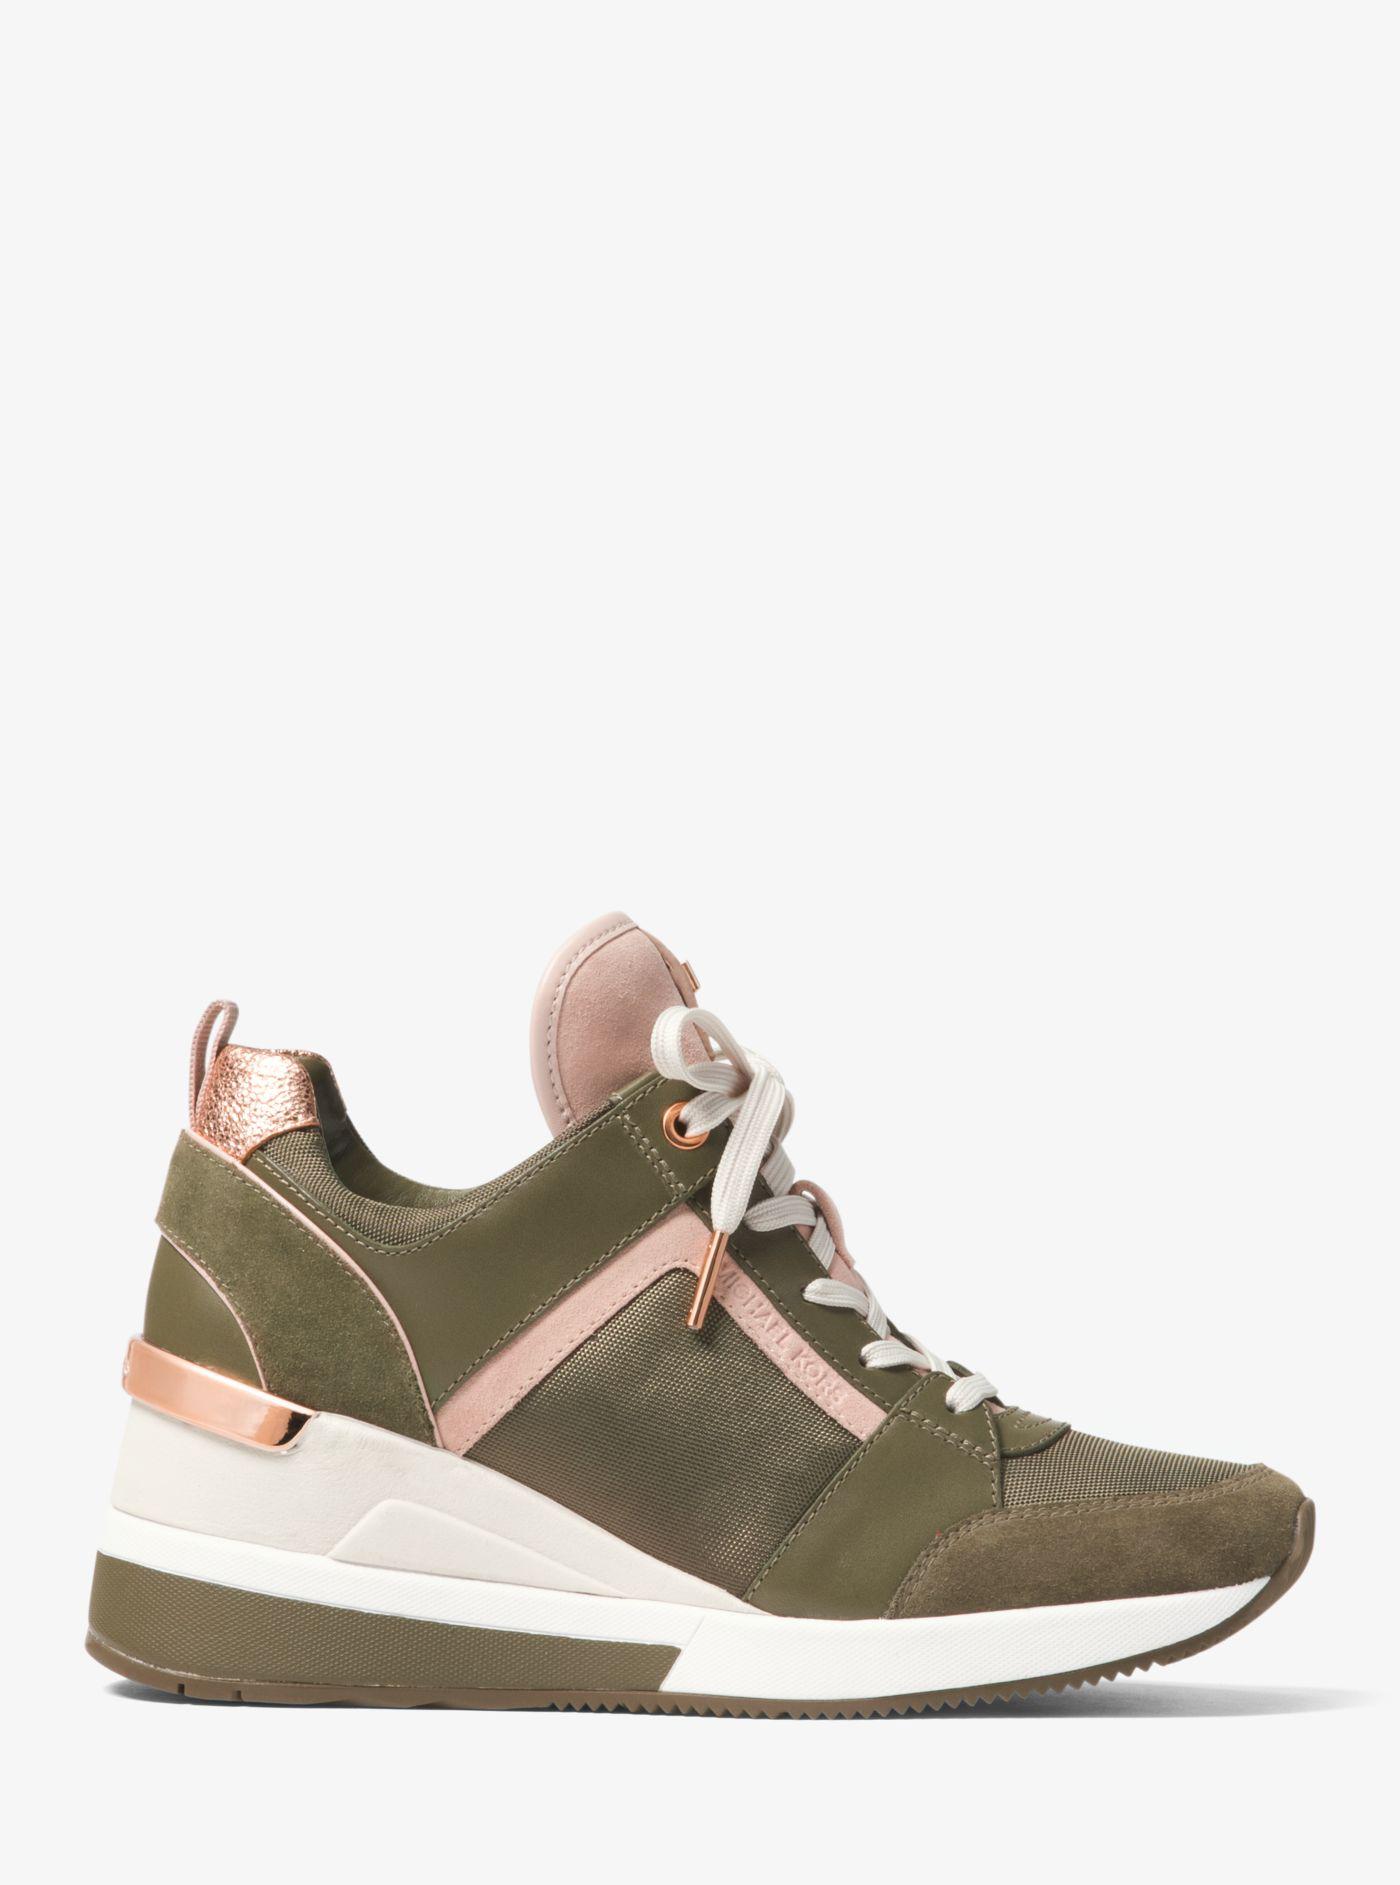 michael kors trainers olive online -